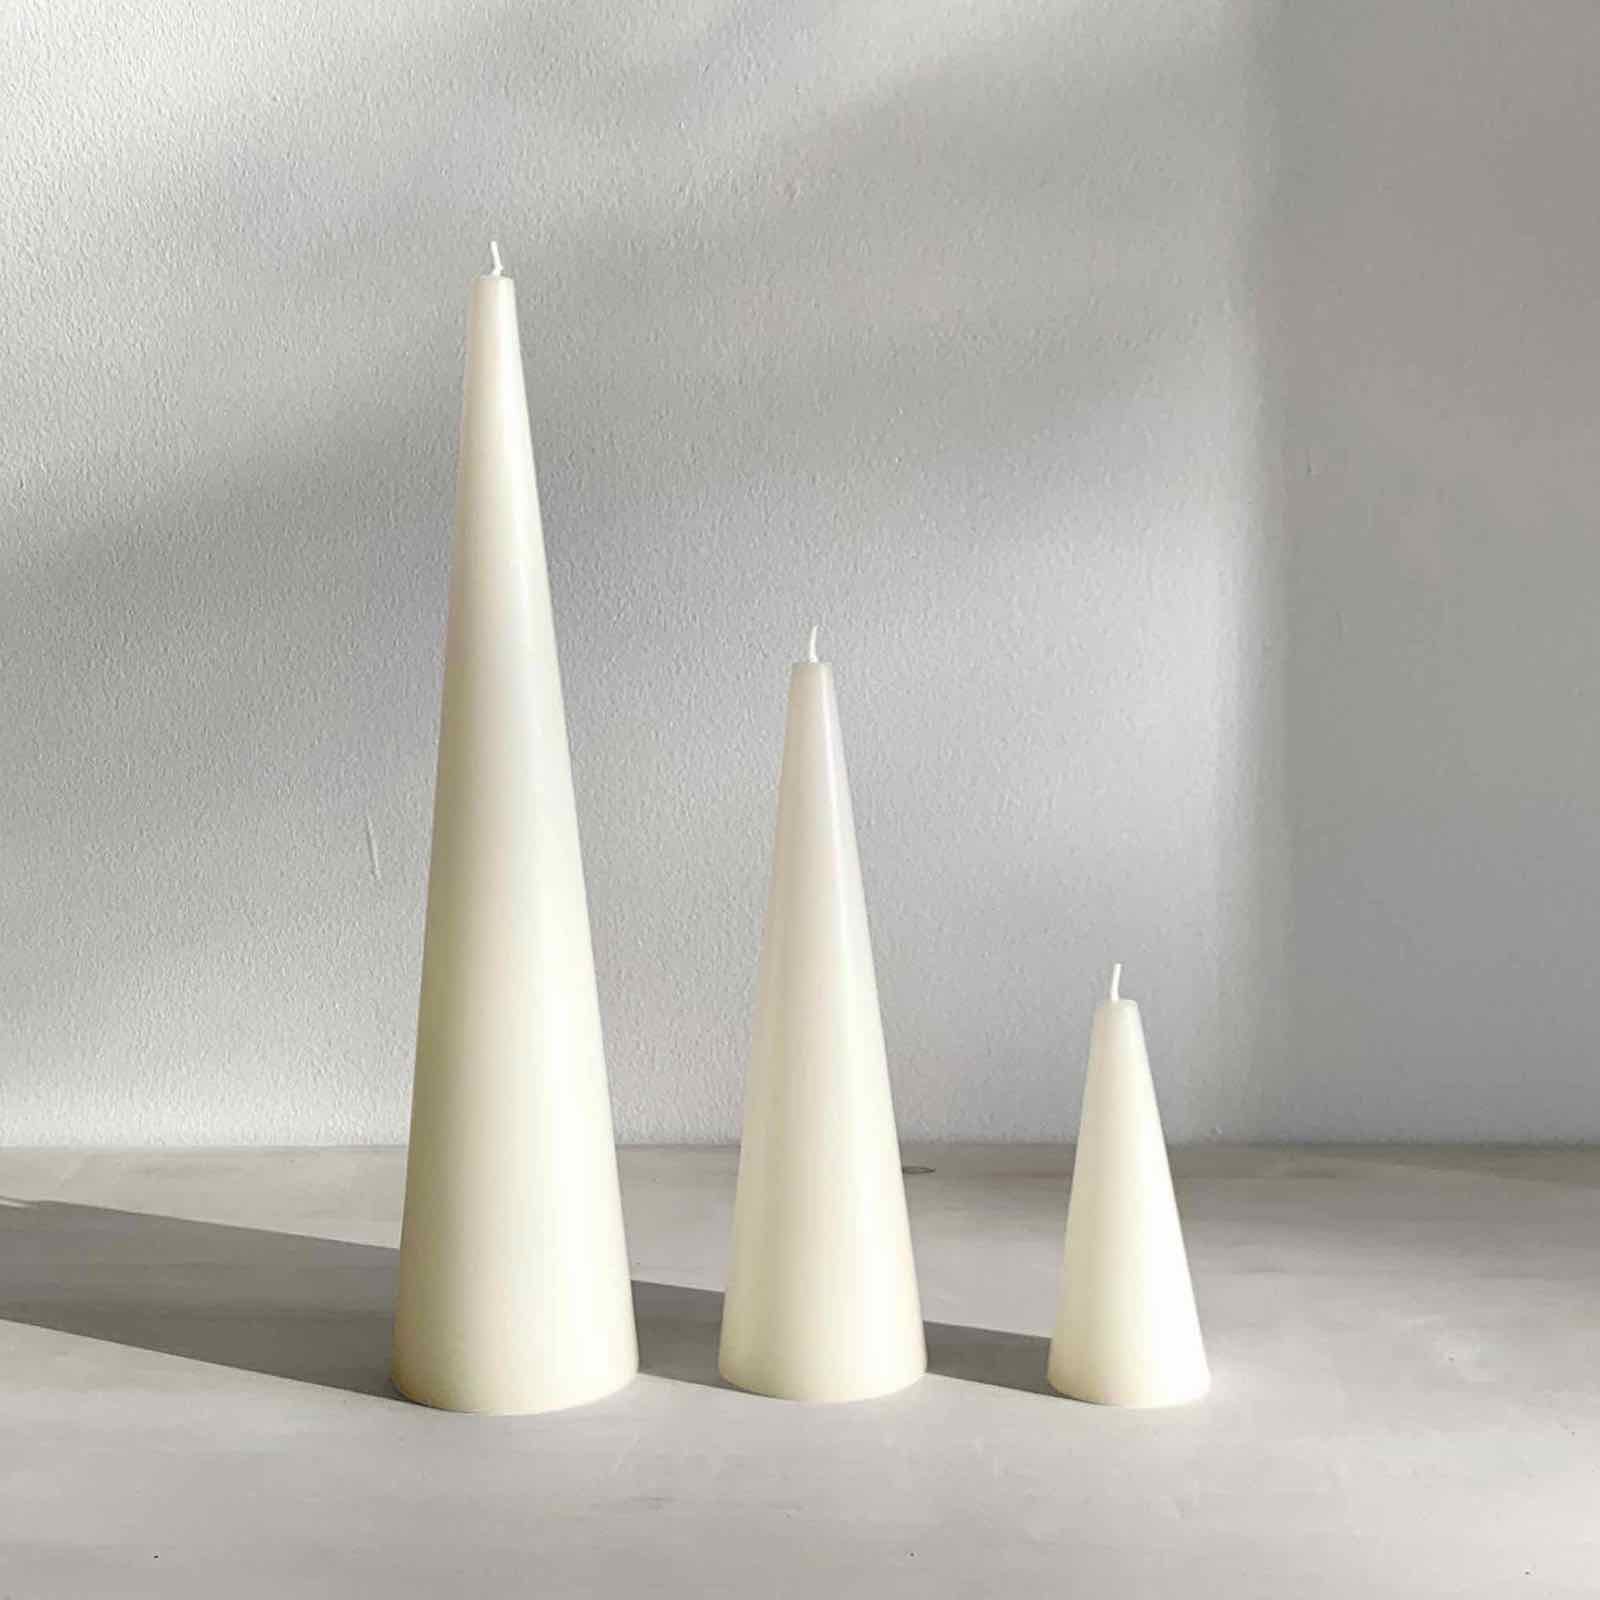 Warm white cone candles